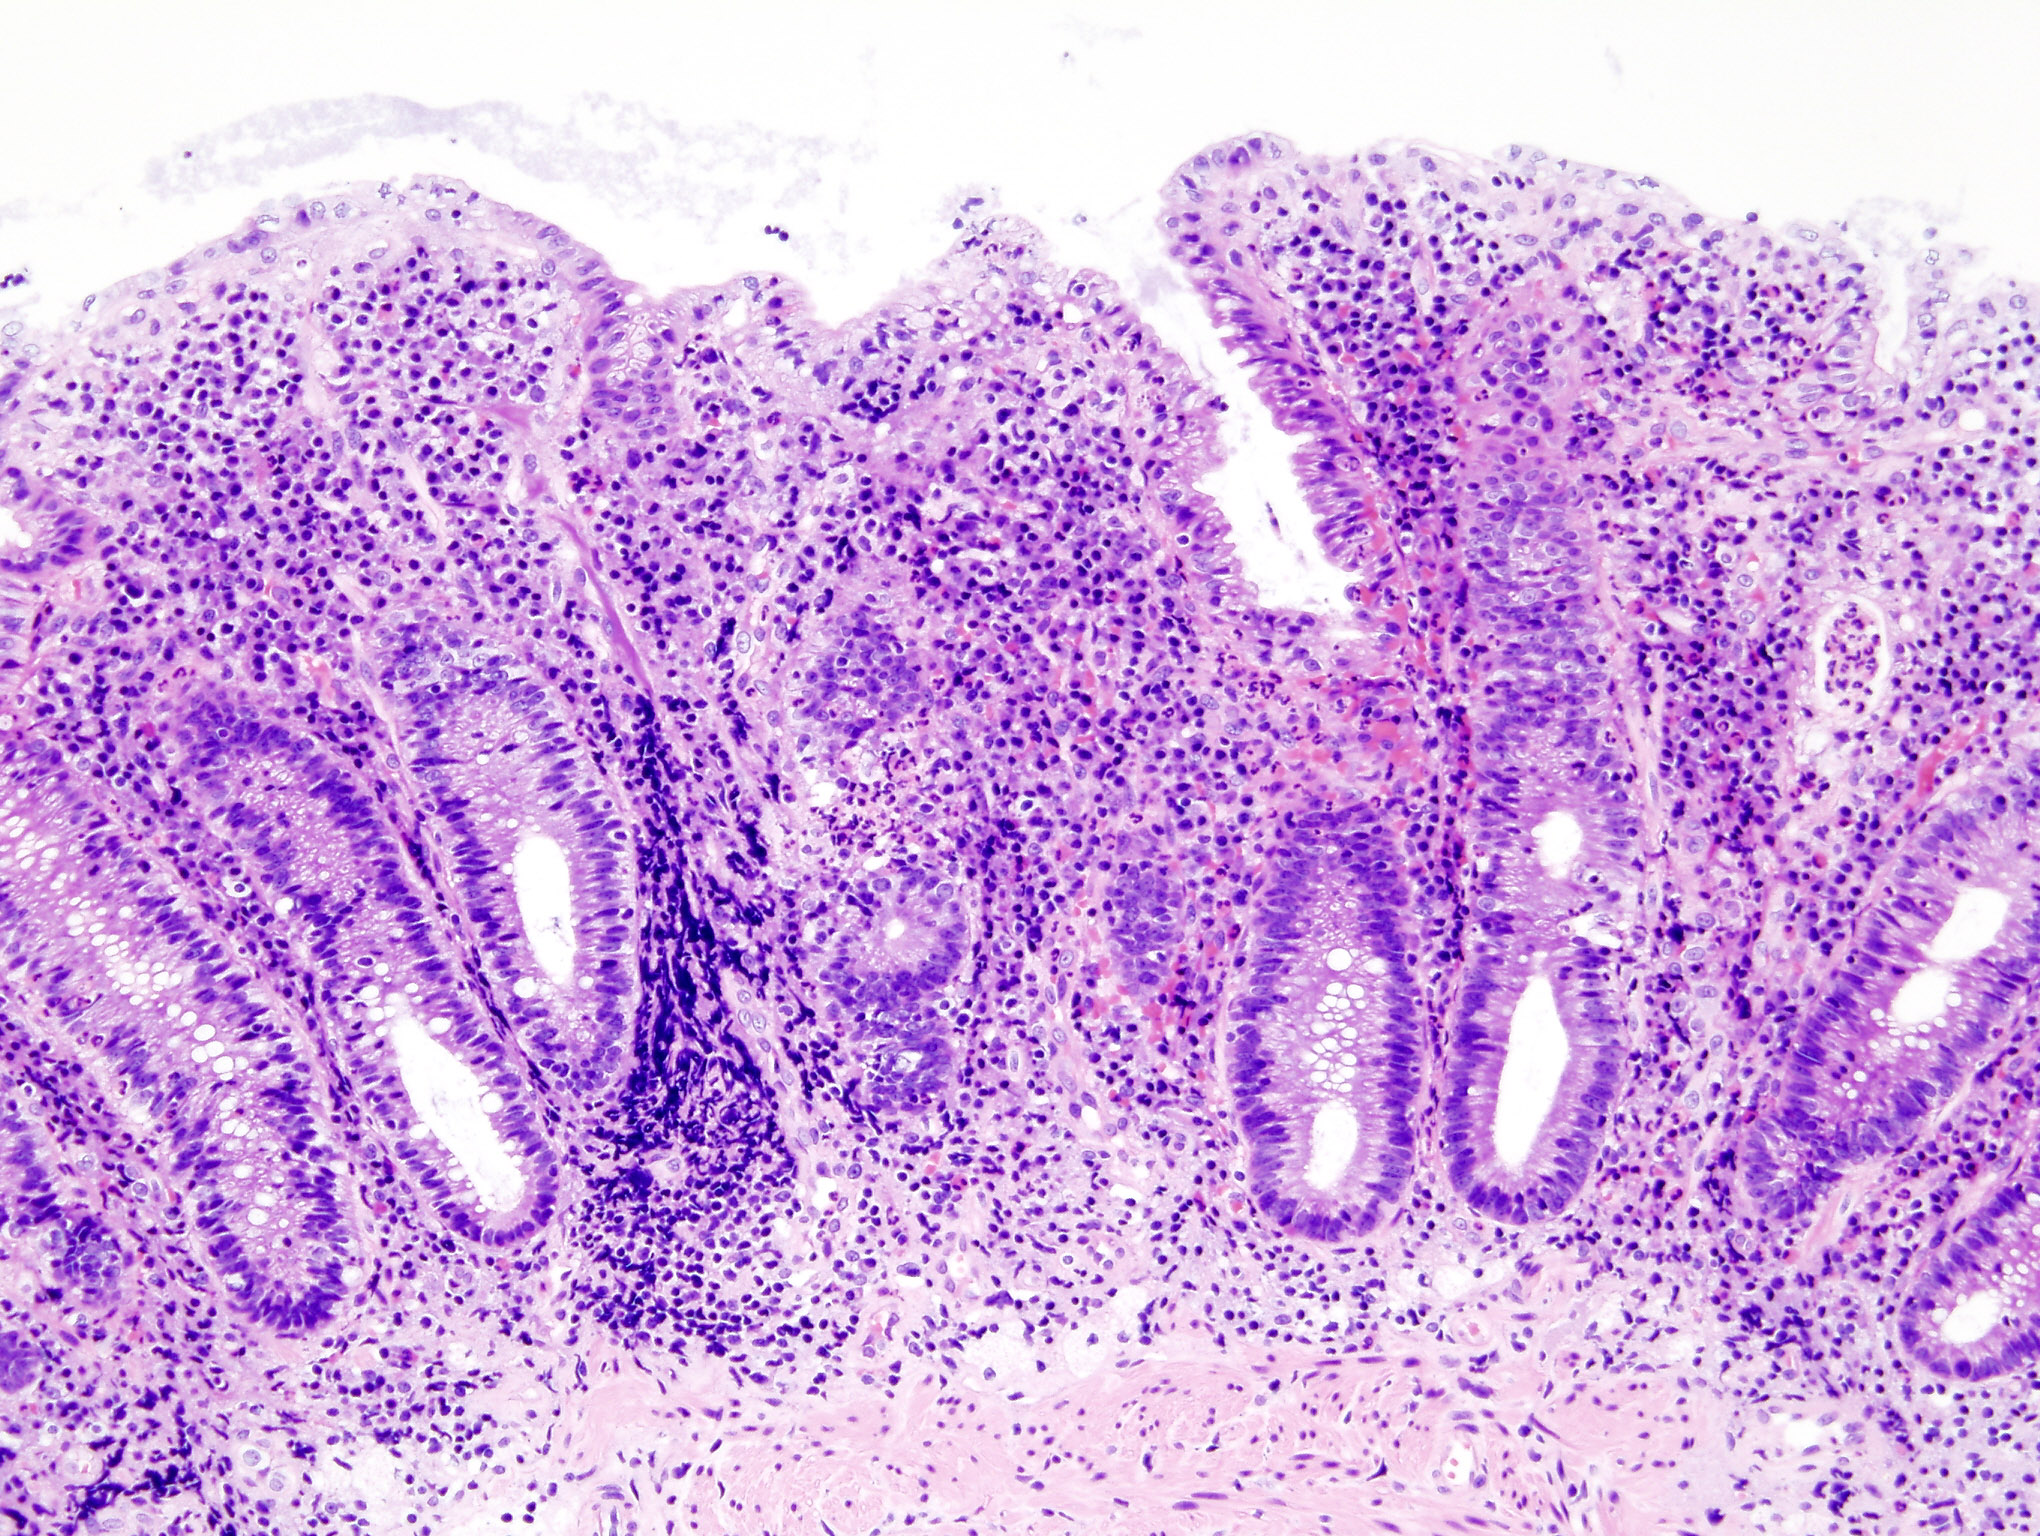 Ulcerative colitis. H&E stain showing marked lymphocytic infiltration (blue/purple) of the intestinal mucosa and distortion of the architecture of the crypts. [16]